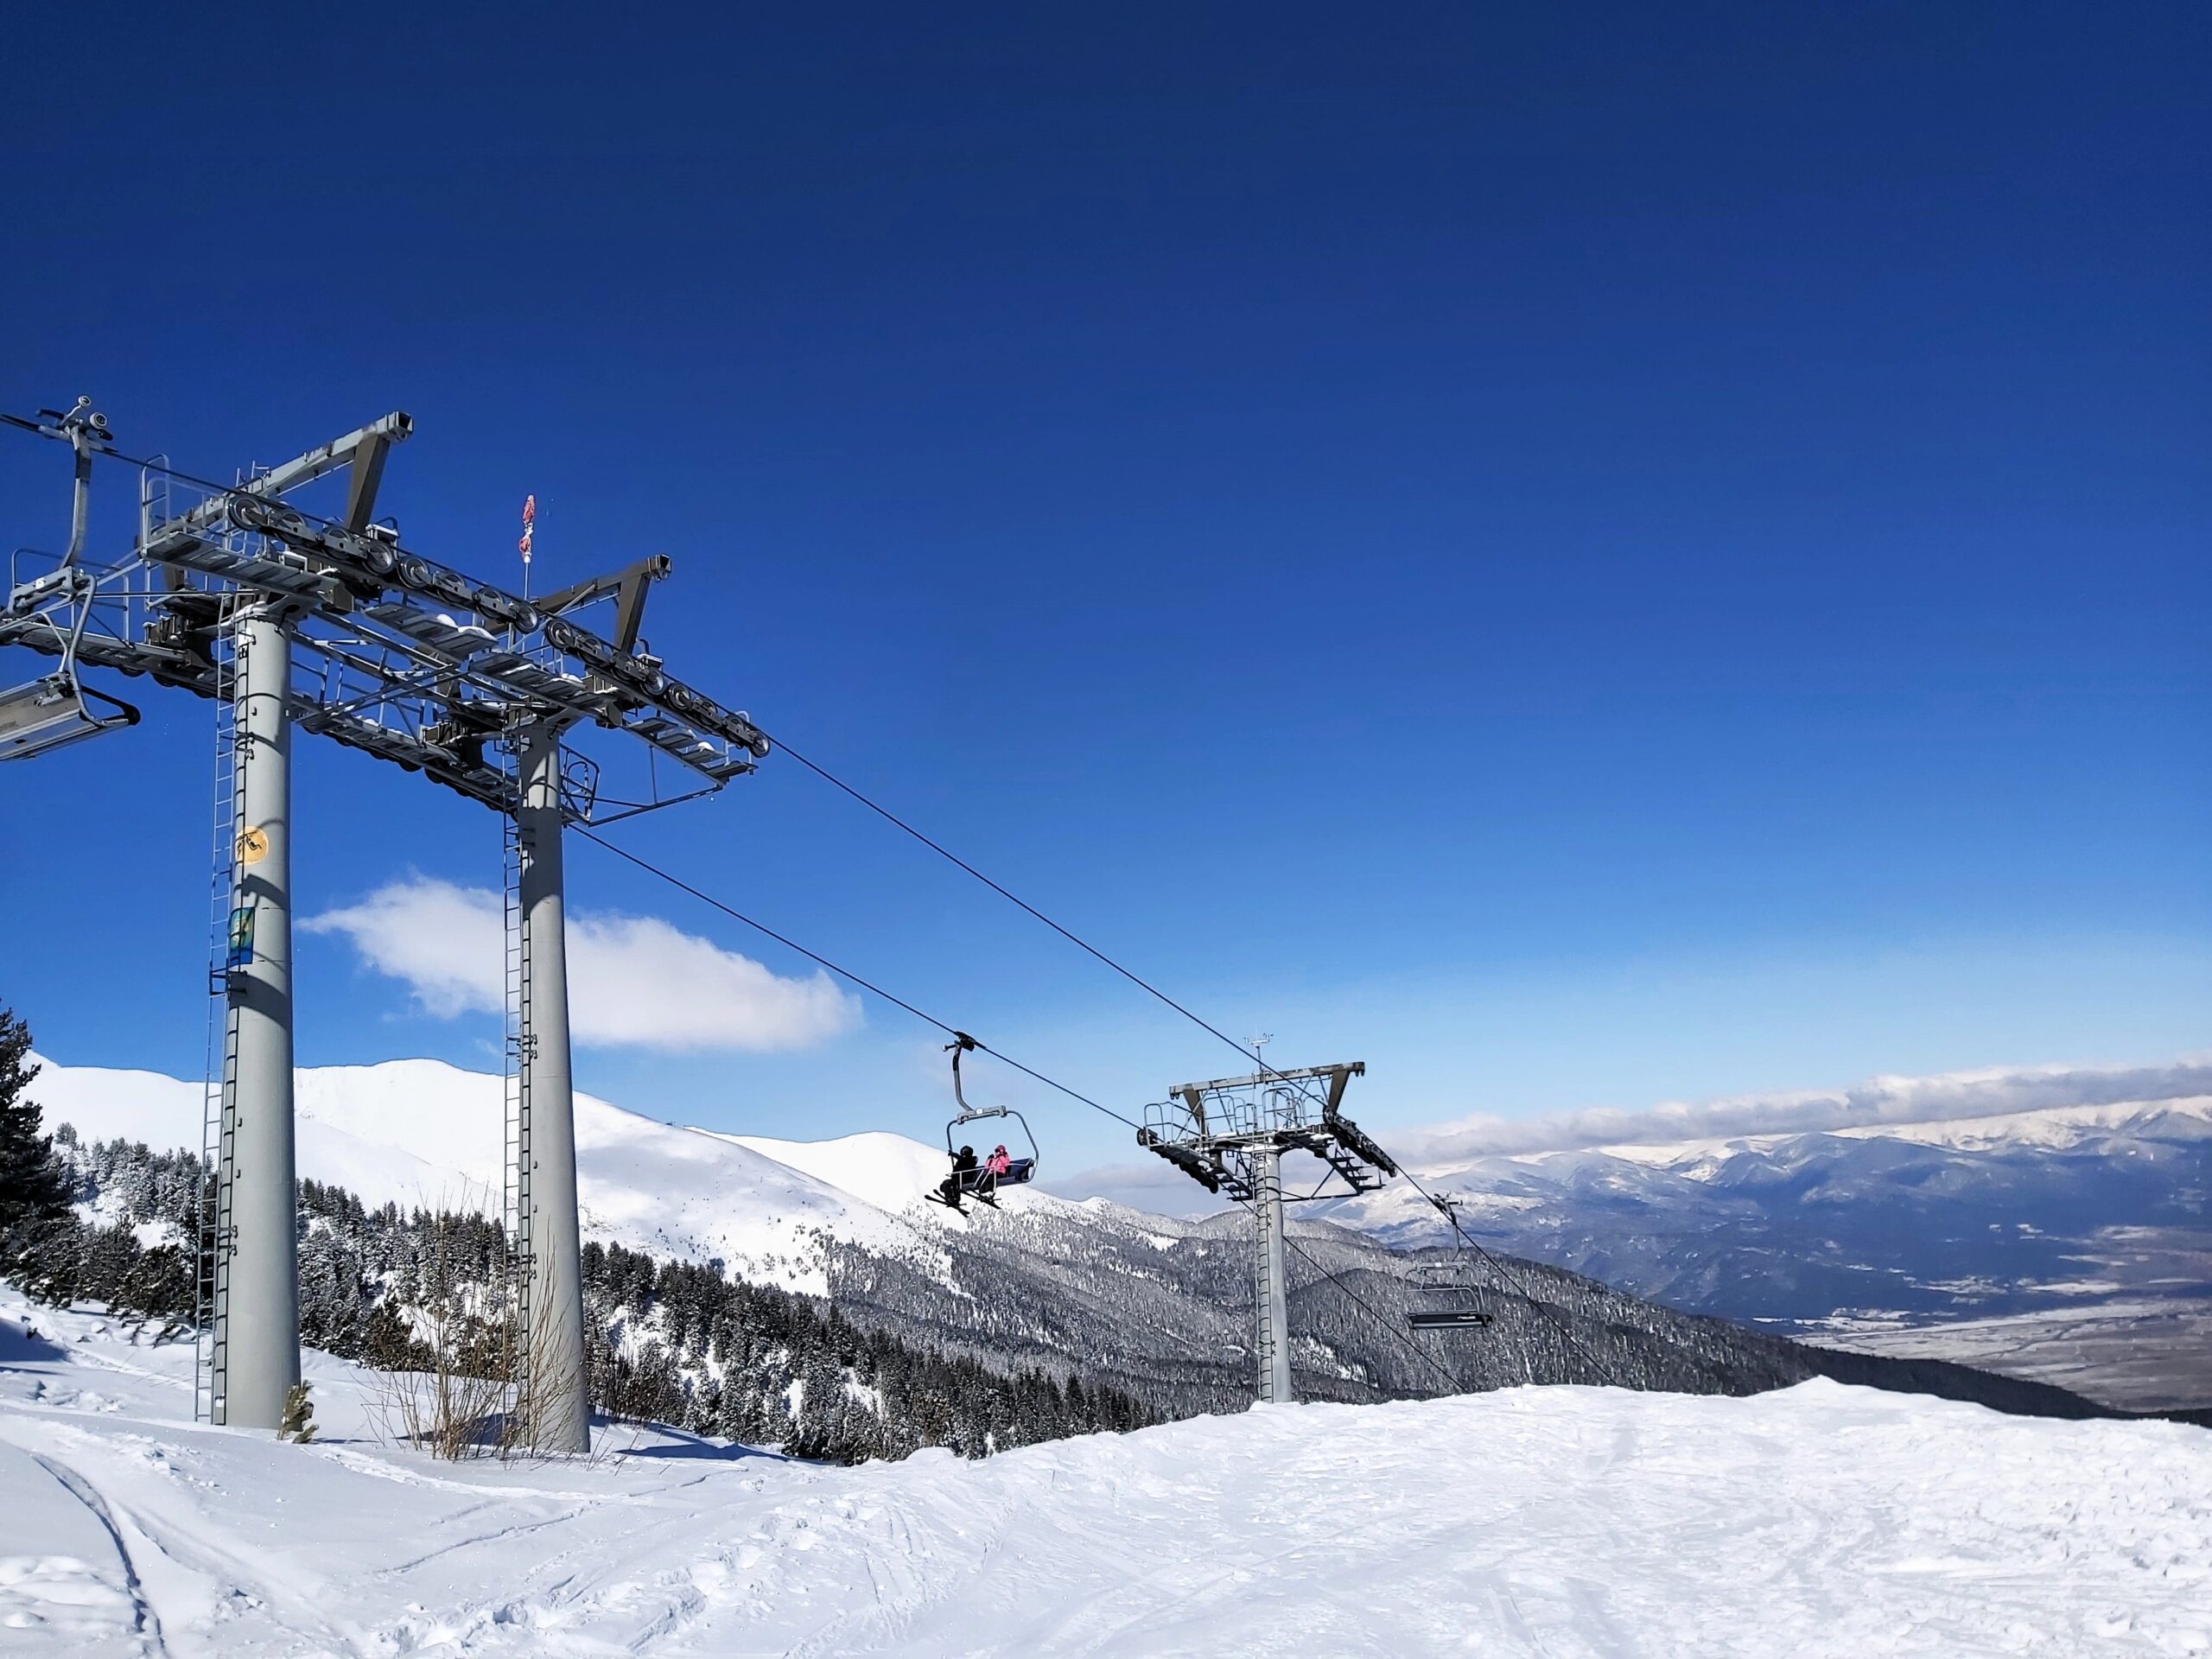 a chairlift at the top of the mountain in Bansko, Bulgaria